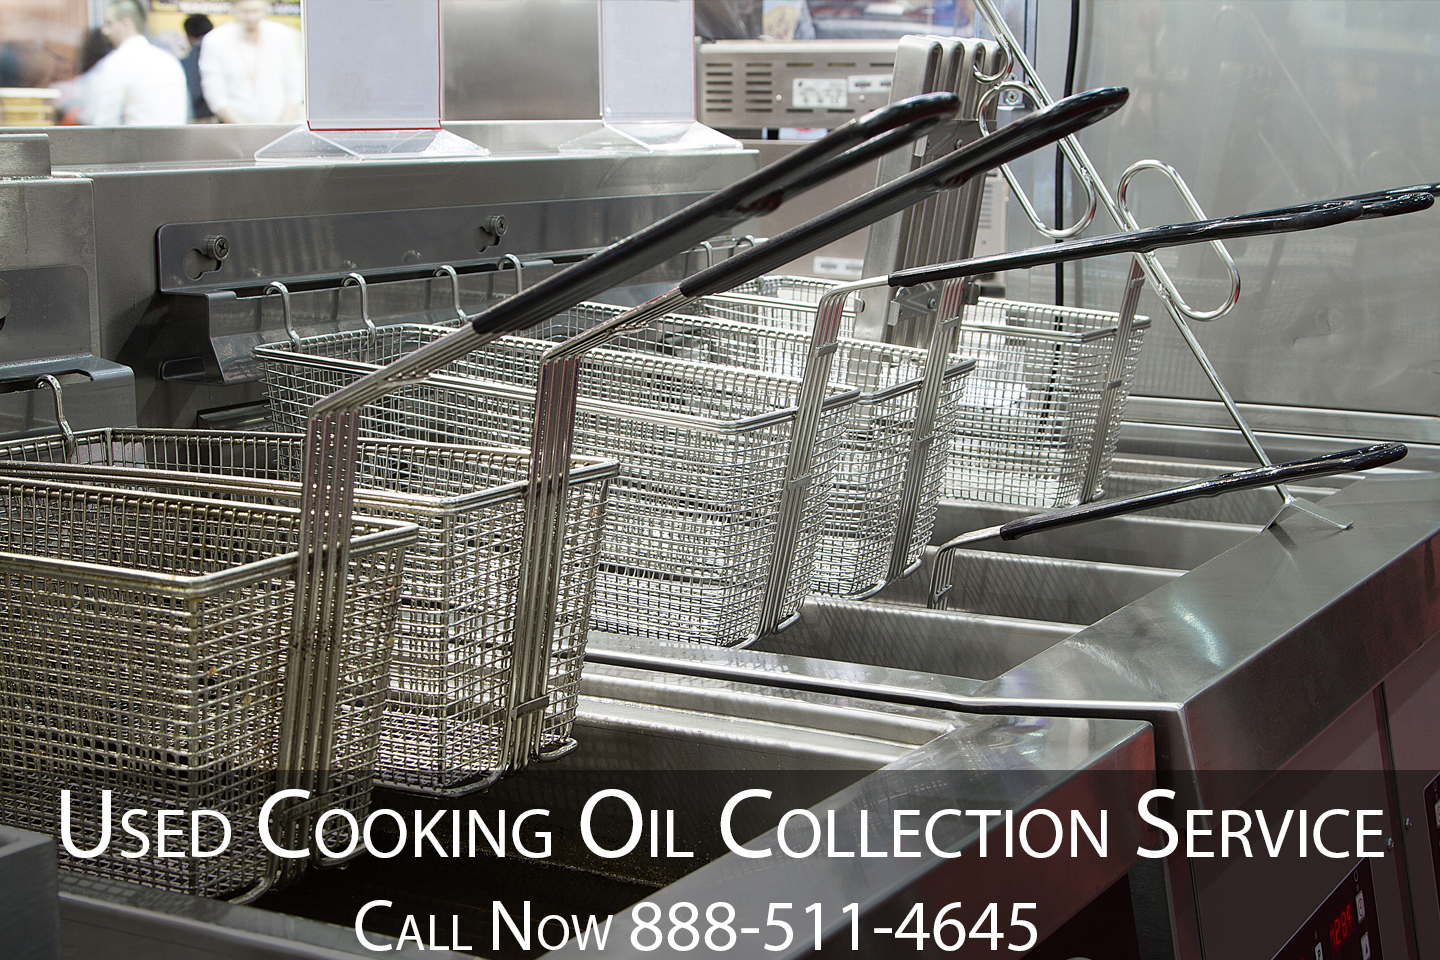 It is required by the city Lake Forest, for all food servicing establishments to hire a licensed used cooking oil collection company to pick up and properly remove their waste cooking oil. As grease collection recycling companies, we must ensure that all waste is transported safely and disposed properly.  The majority of used cooking oil collected from commercial kitchens are filtered and processed turning it into renewable fuel called biodiesel. With a large increase in food servicing estabishments, a substantial amount of coming from restaurants are responsible for a major percentage of fueling transportation vehicles.